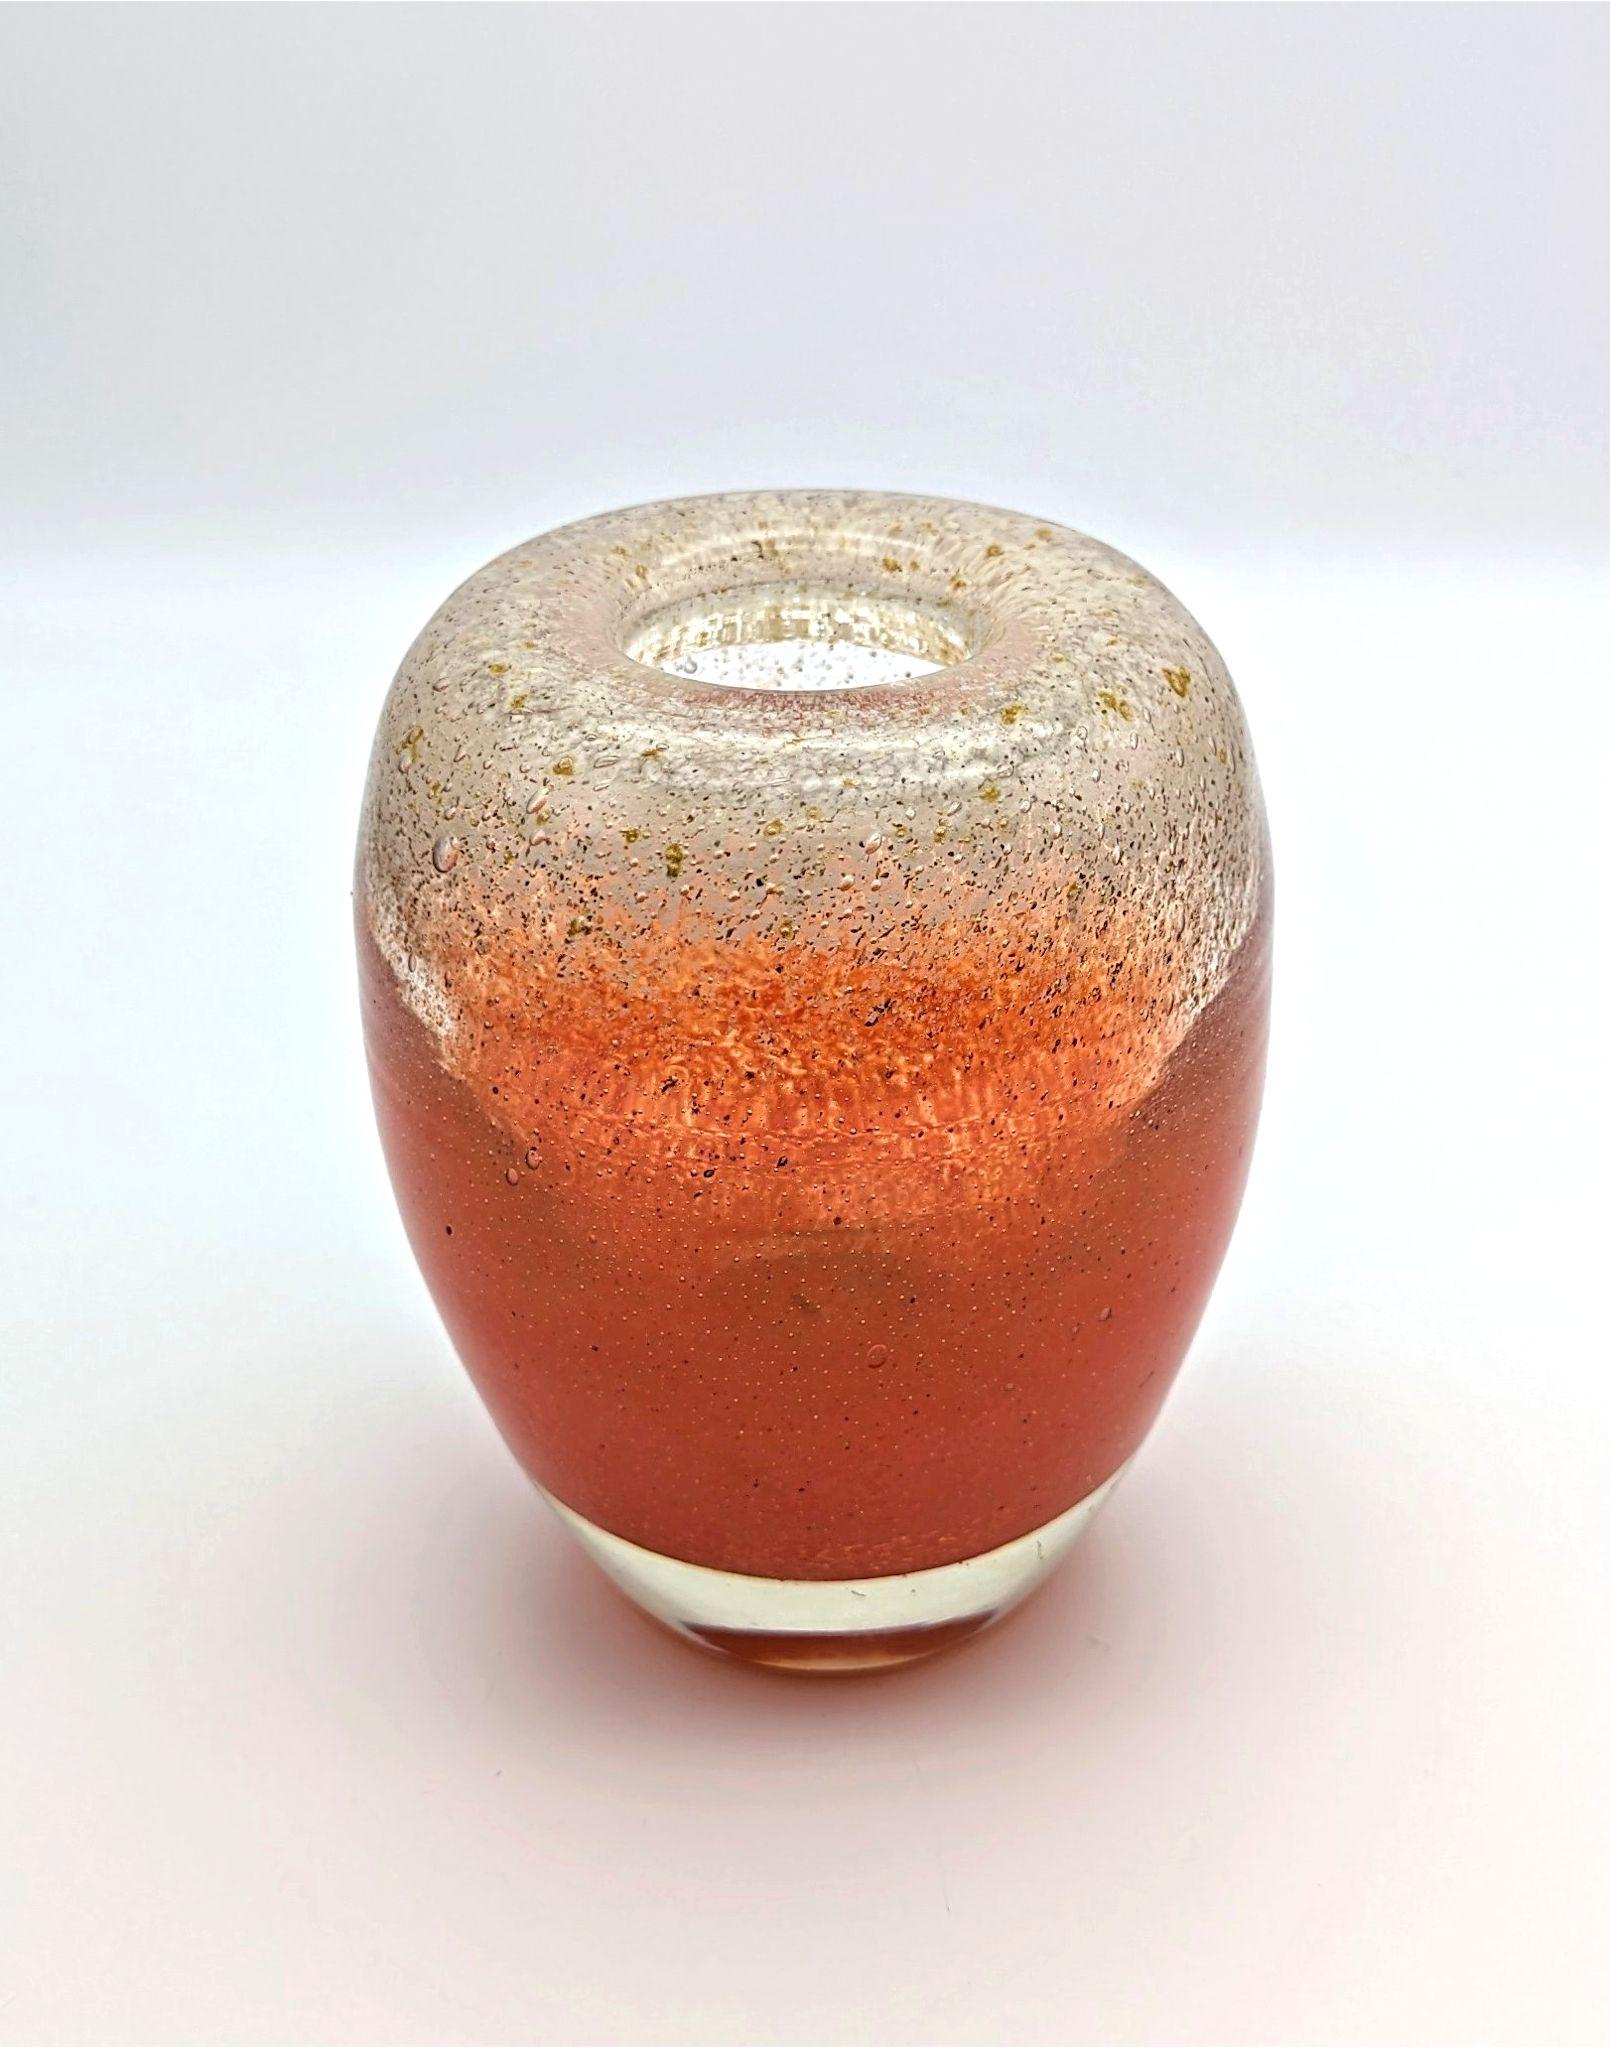 The ovoid shape of this vase was designed in the 1930ties by Walter Dexel, who was related to artists form the Bauhaus in the 1920ties. The clear and elegant shape was then decorated by Karl WIedmann and his team in the former glass studio of the